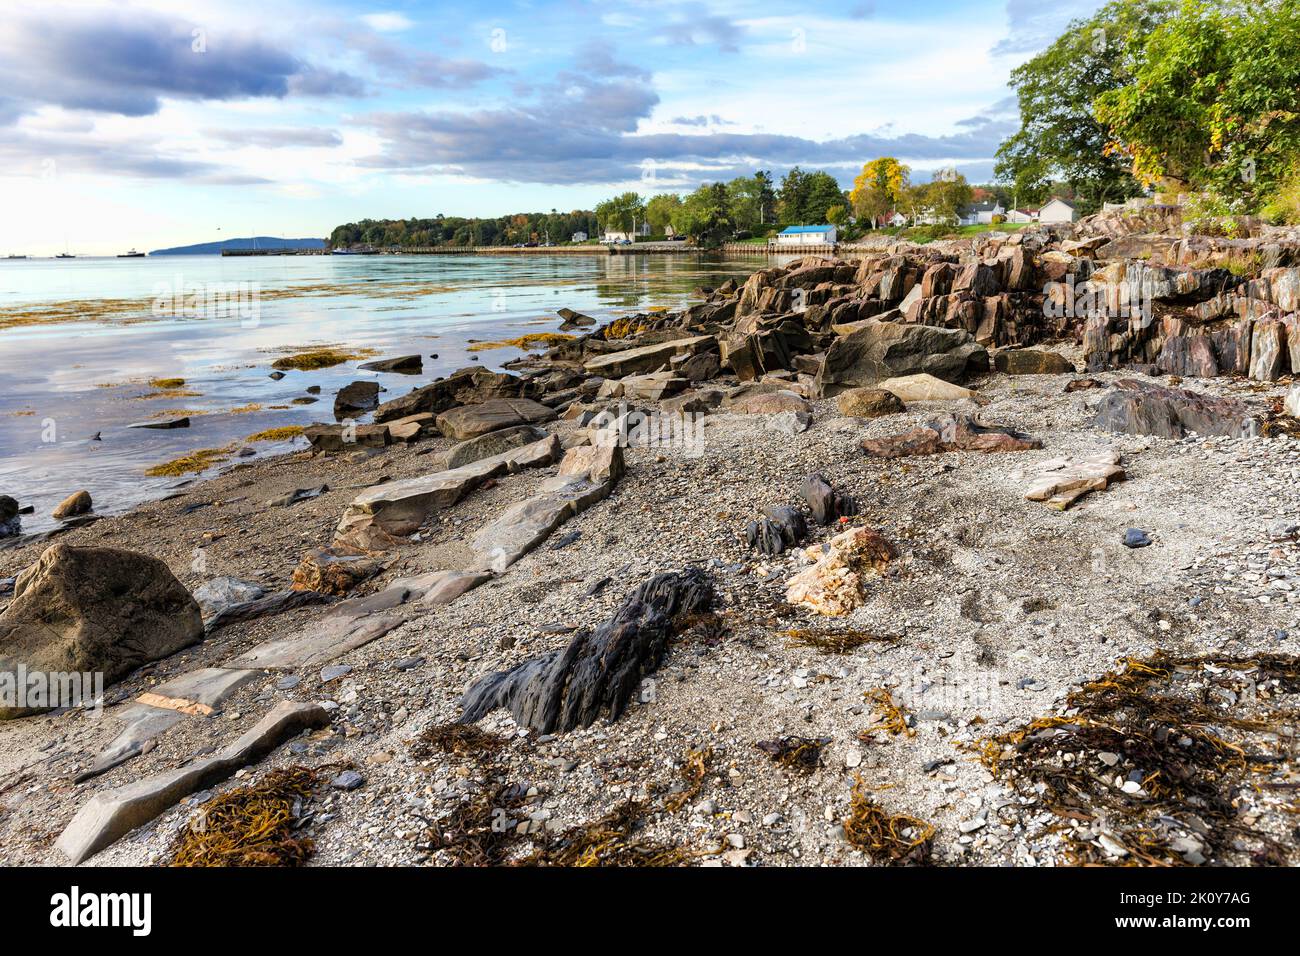 Wide view of the rocky coastline of Penobscot Bay in Maine in the early morning light. Stock Photo